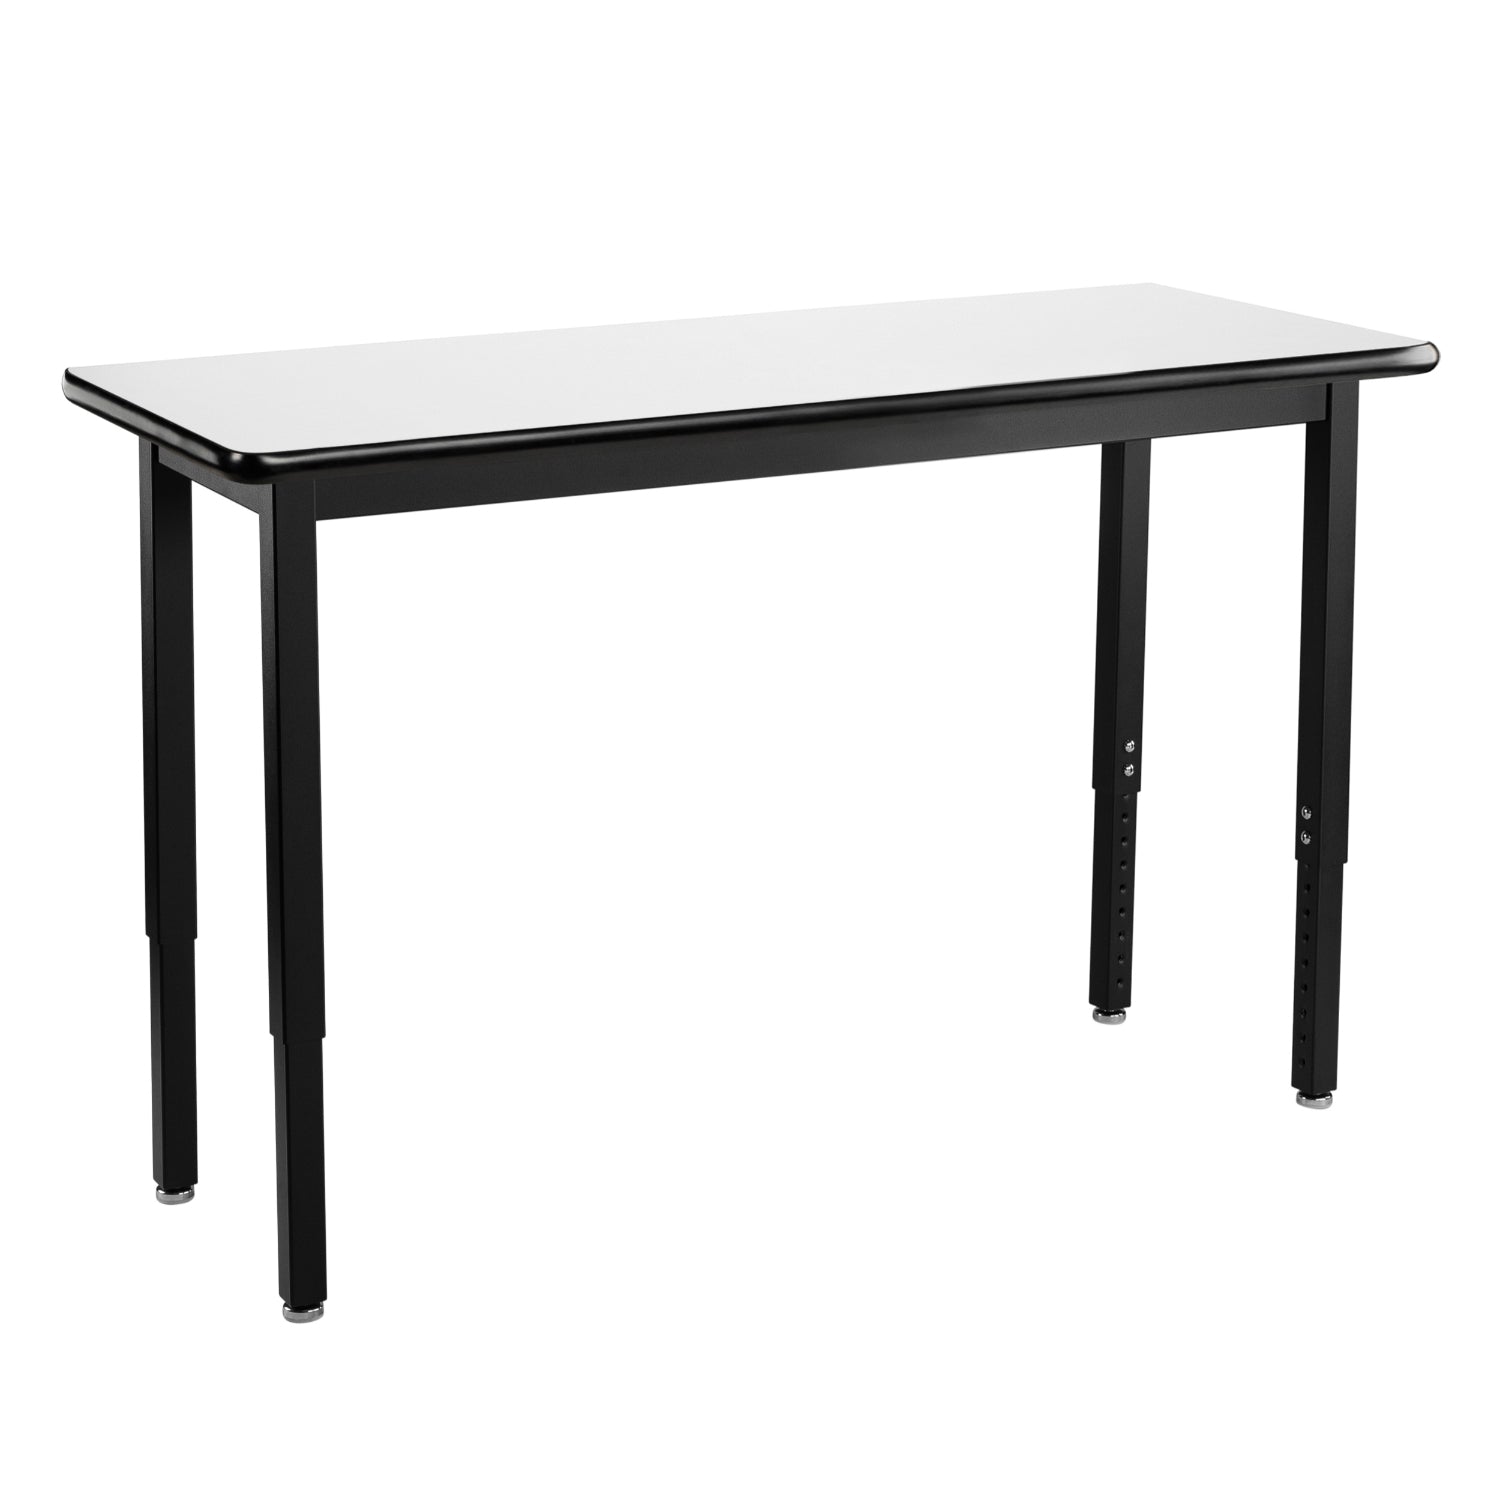 Heavy-Duty Height-Adjustable Utility Table, Black Frame, 18" x 42", Whiteboard High-Pressure Laminate Top